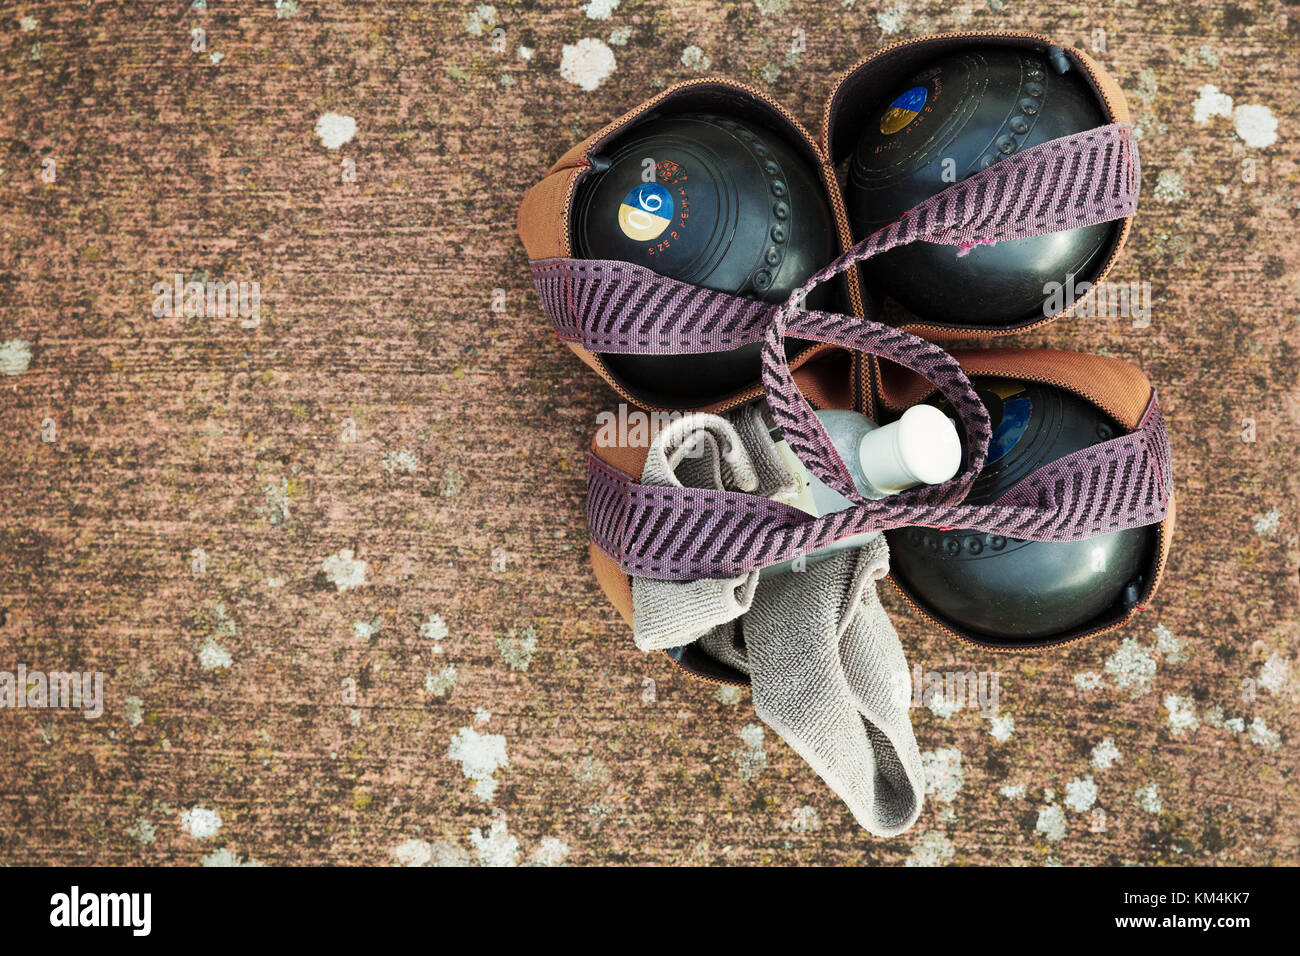 Overhead view of four wooden lawn bowls in a ball carrier with a cloth to clean them. Stock Photo